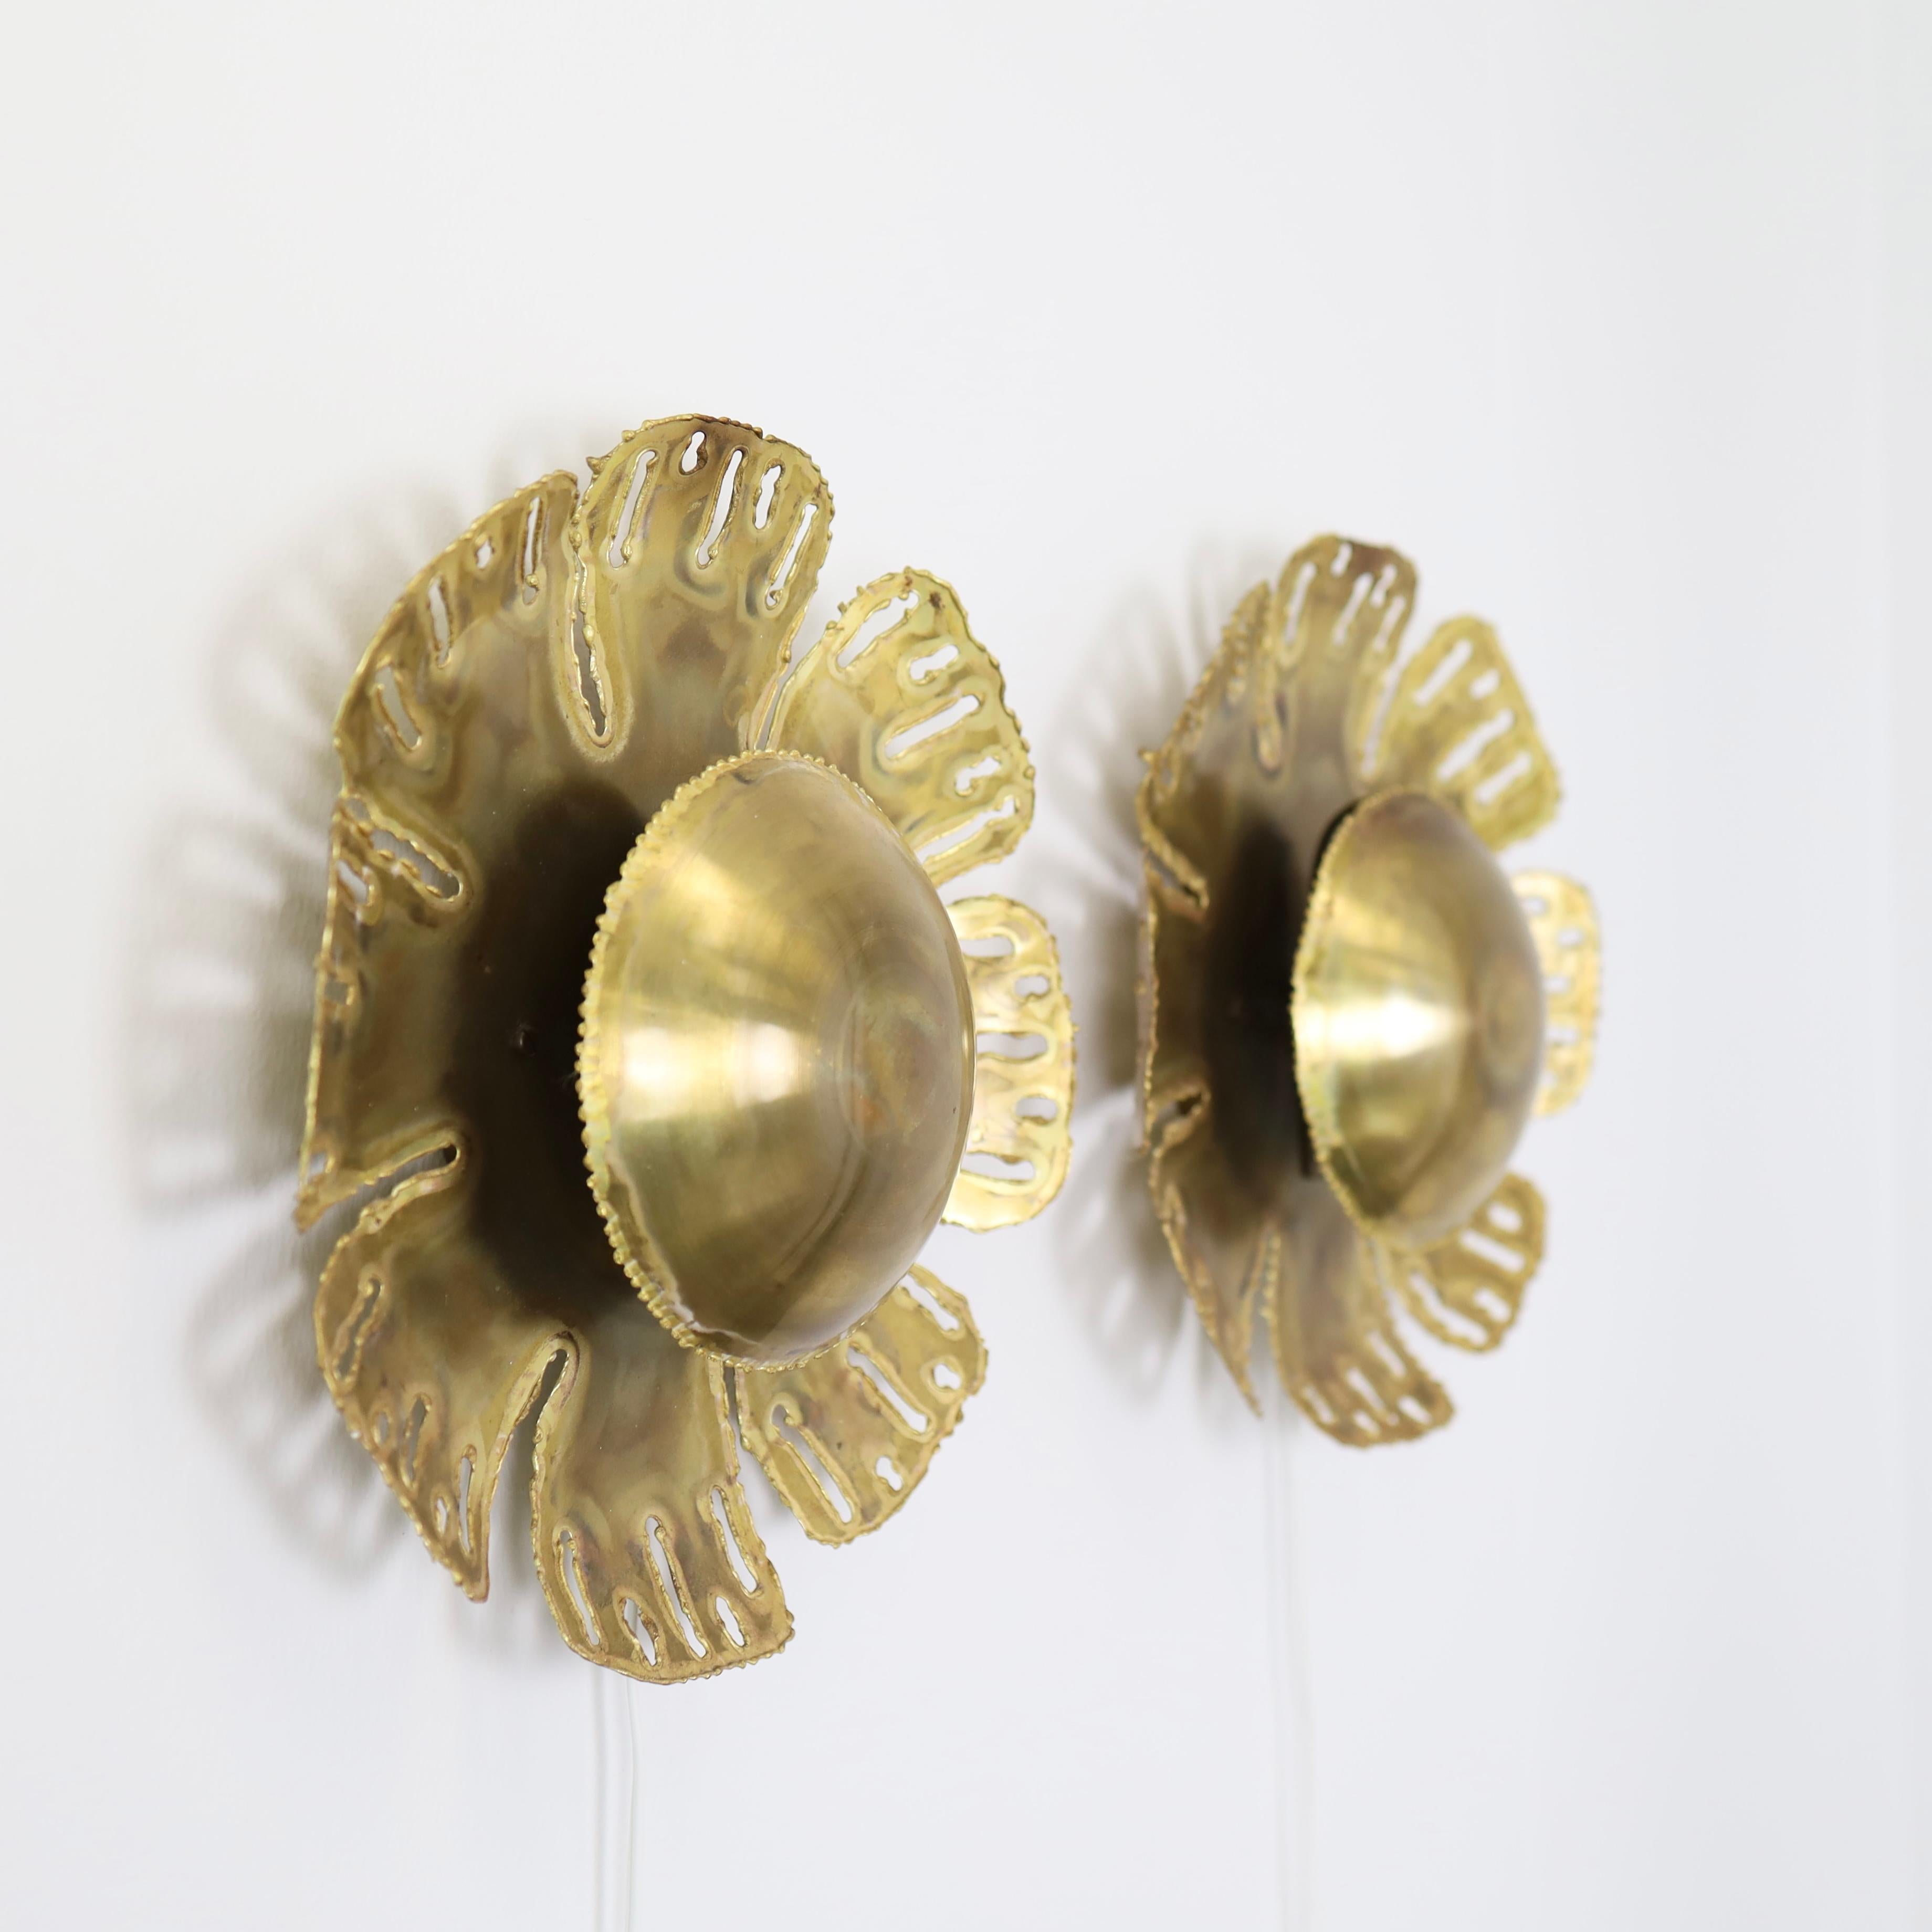 A set of sun-shaped brass wall lamps designed by Svend Aage Holm Sørensen in the 1960s. This eye-catching design is a trademark of the Danish designer. 

* A set (2) of sunflower shaped brass wall sconces
* Designer: Svend Aage Holm Sørensen
*